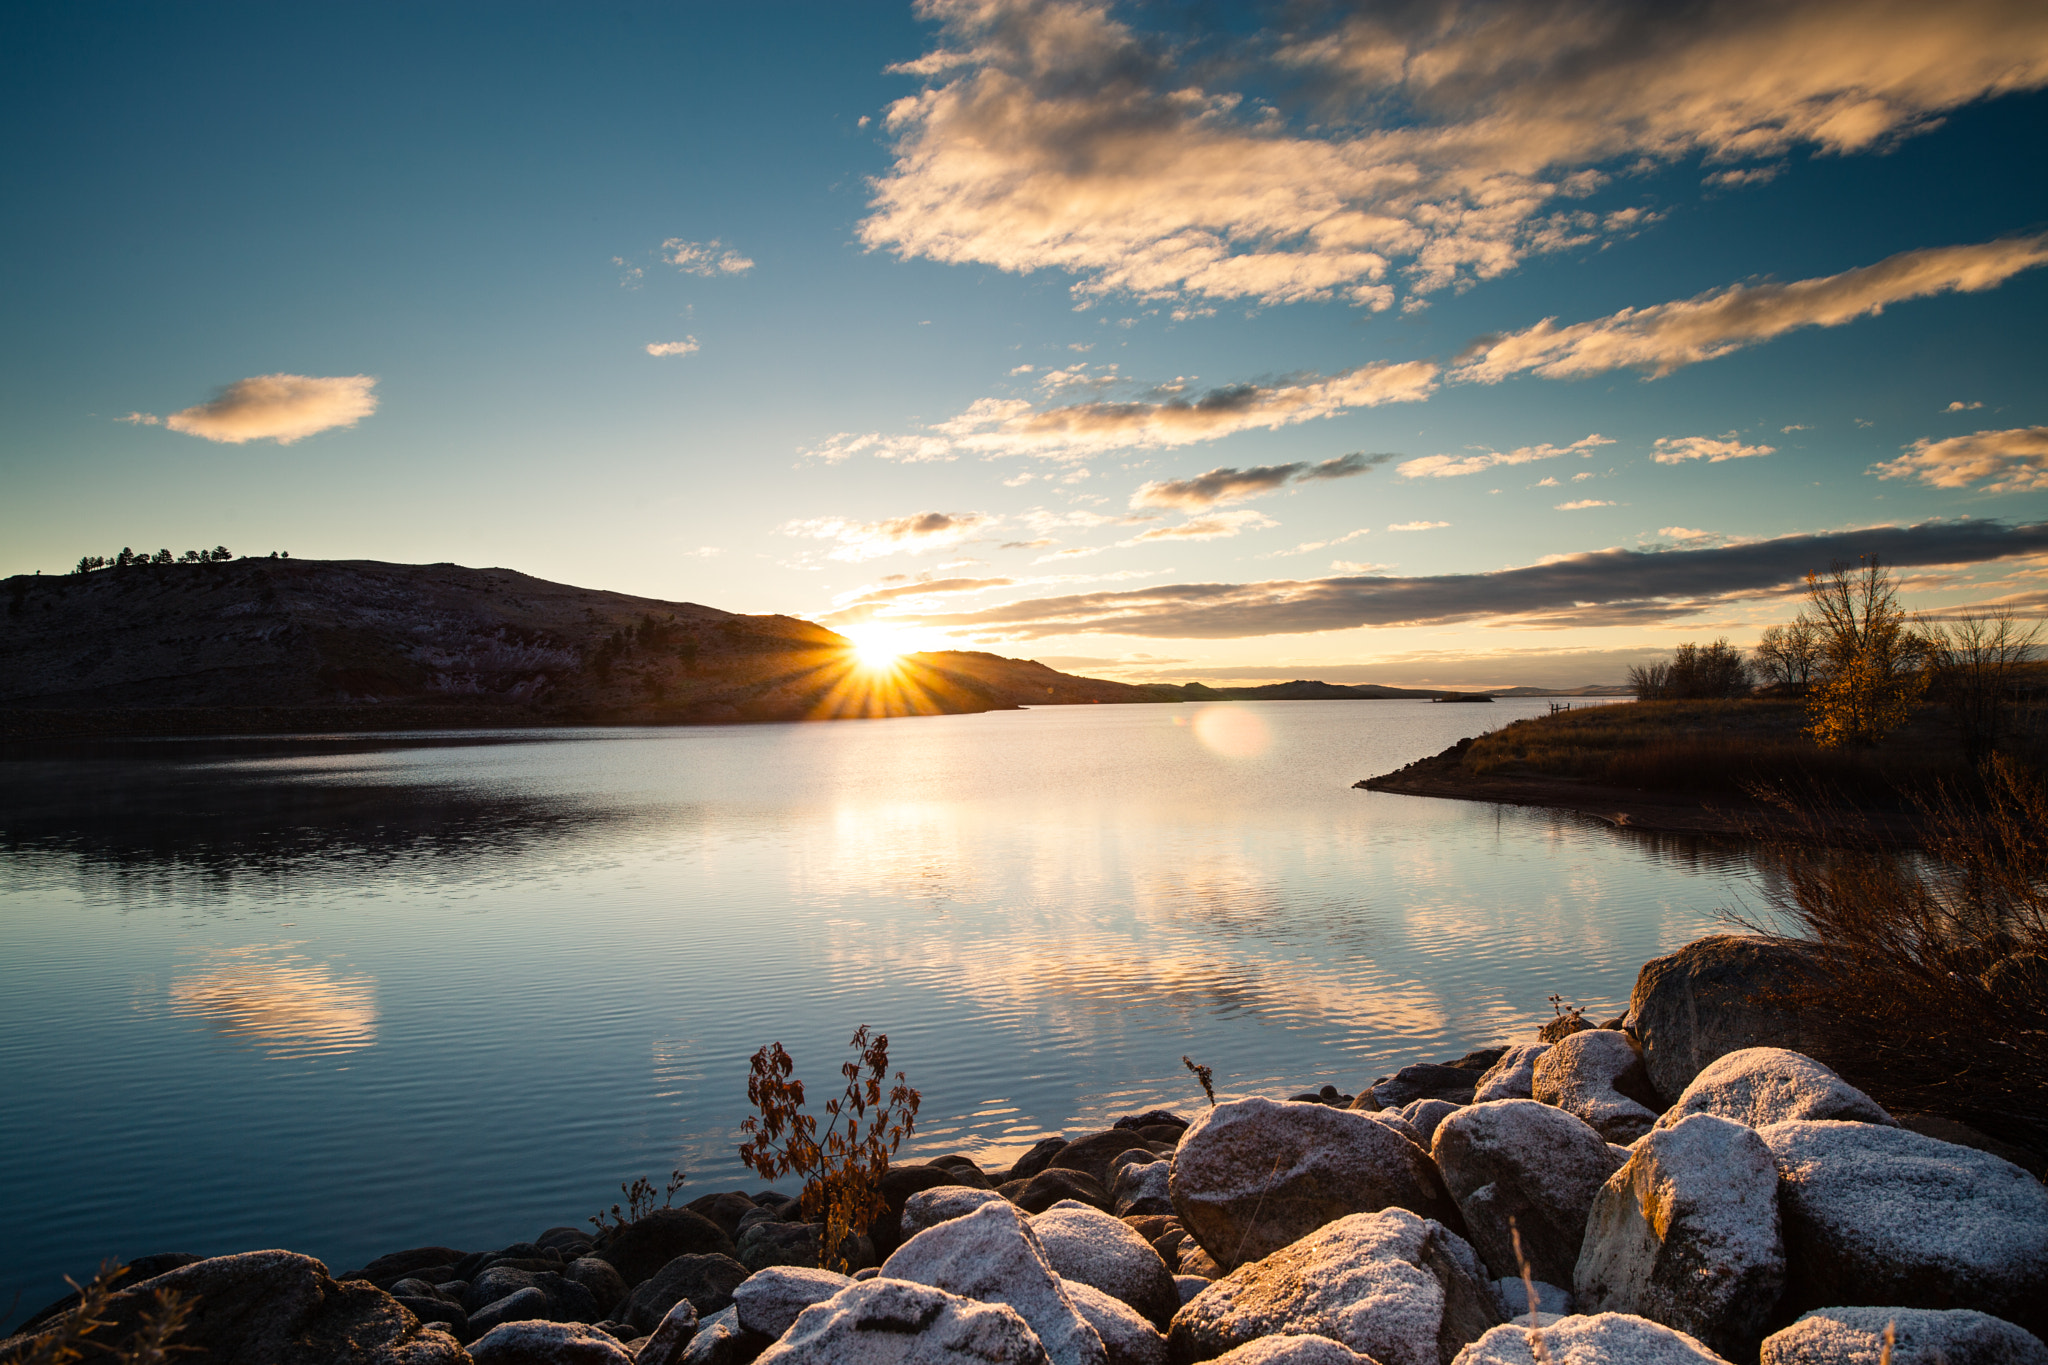 ZEISS Milvus 21mm F2.8 sample photo. Sunrise over a lake in wyoming photography